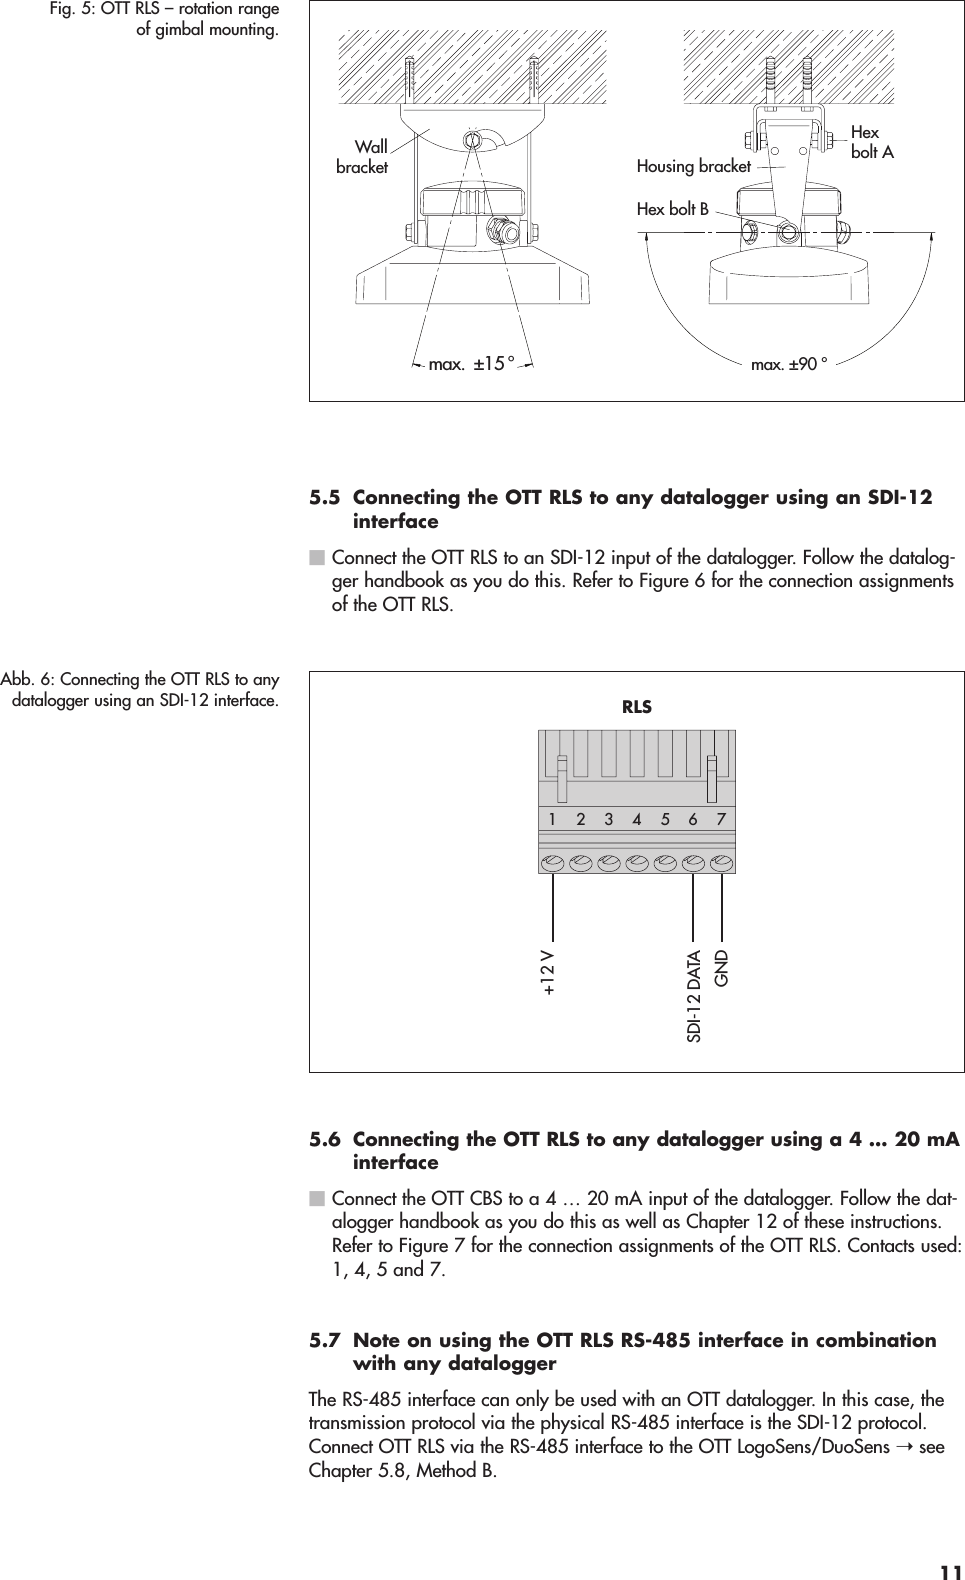 5.5 Connecting the OTT RLS to any datalogger using an SDI-12interfaceⅥConnect the OTT RLS to an SDI-12 input of the datalogger. Follow the datalog-ger handbook as you do this. Refer to Figure 6 for the connection assignmentsof the OTT RLS.5.6 Connecting the OTT RLS to any datalogger using a 4 … 20 mAinterfaceⅥConnect the OTT CBS to a 4 … 20 mA input of the datalogger. Follow the dat-alogger handbook as you do this as well as Chapter 12 of these instructions.Refer to Figure 7 for the connection assignments of the OTT RLS. Contacts used:1, 4, 5 and 7.5.7 Note on using the OTT RLS RS-485 interface in combinationwith any dataloggerThe RS-485 interface can only be used with an OTT datalogger. In this case, thetransmission protocol via the physical RS-485 interface is the SDI-12 protocol.Connect OTT RLS via the RS-485 interface to the OTT LogoSens/DuoSens ➝ seeChapter 5.8, Method B.+12 VGNDSDI-12 DATA5423176RLSAbb. 6: Connecting the OTT RLS to anydatalogger using an SDI-12 interface.max. ±90 °Hexbolt A Hex bolt BWallbracket Housing bracketmax.  ±15 °Fig. 5: OTT RLS – rotation rangeof gimbal mounting.11